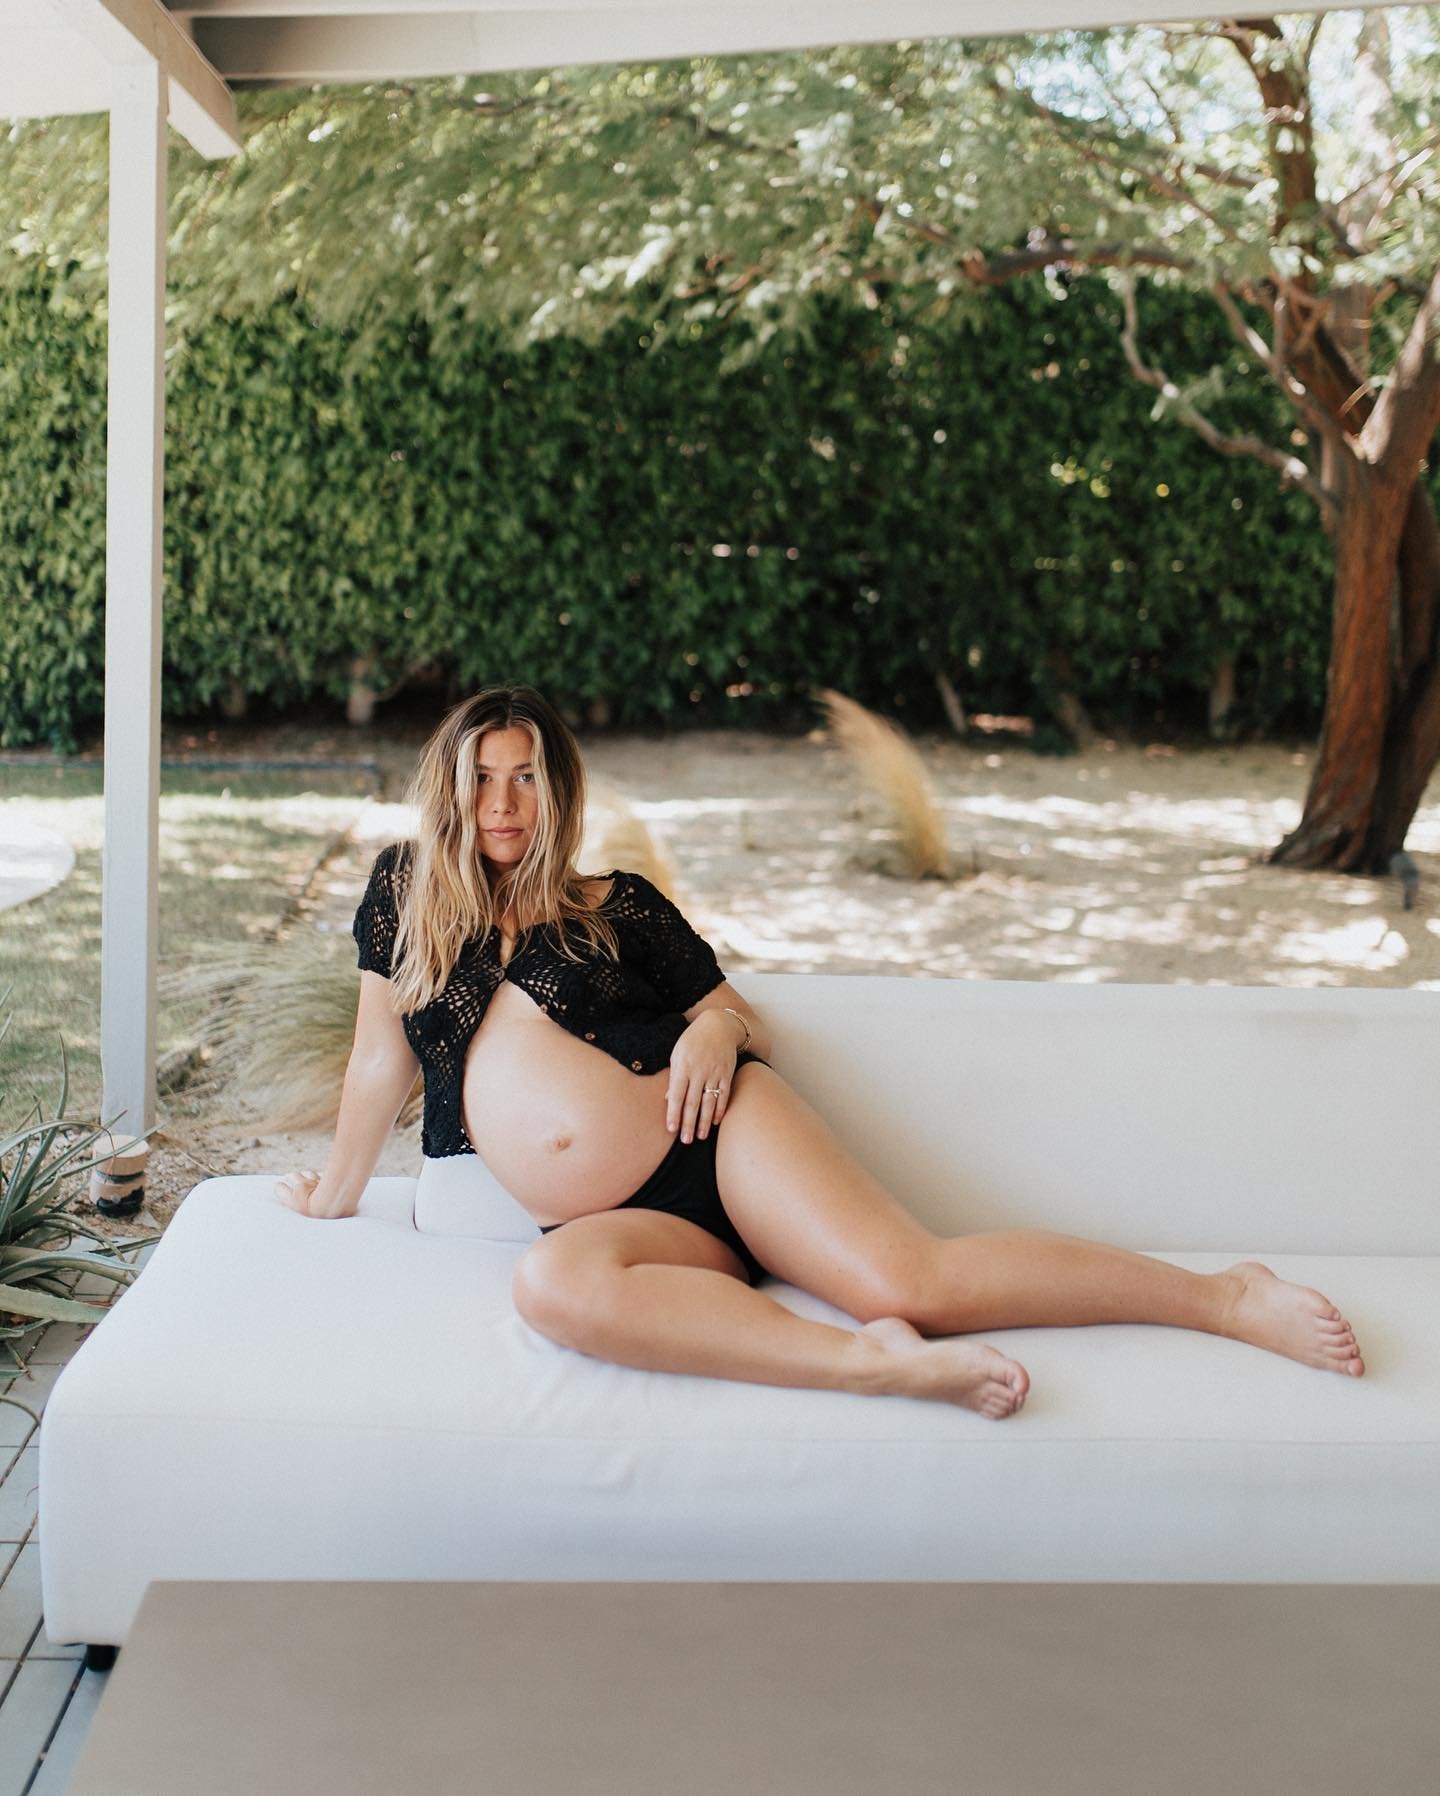 Me realizing I never posted these stellar maternity photos from earlier this year&hellip; my sis @toriwinstead is just ✨✨✨